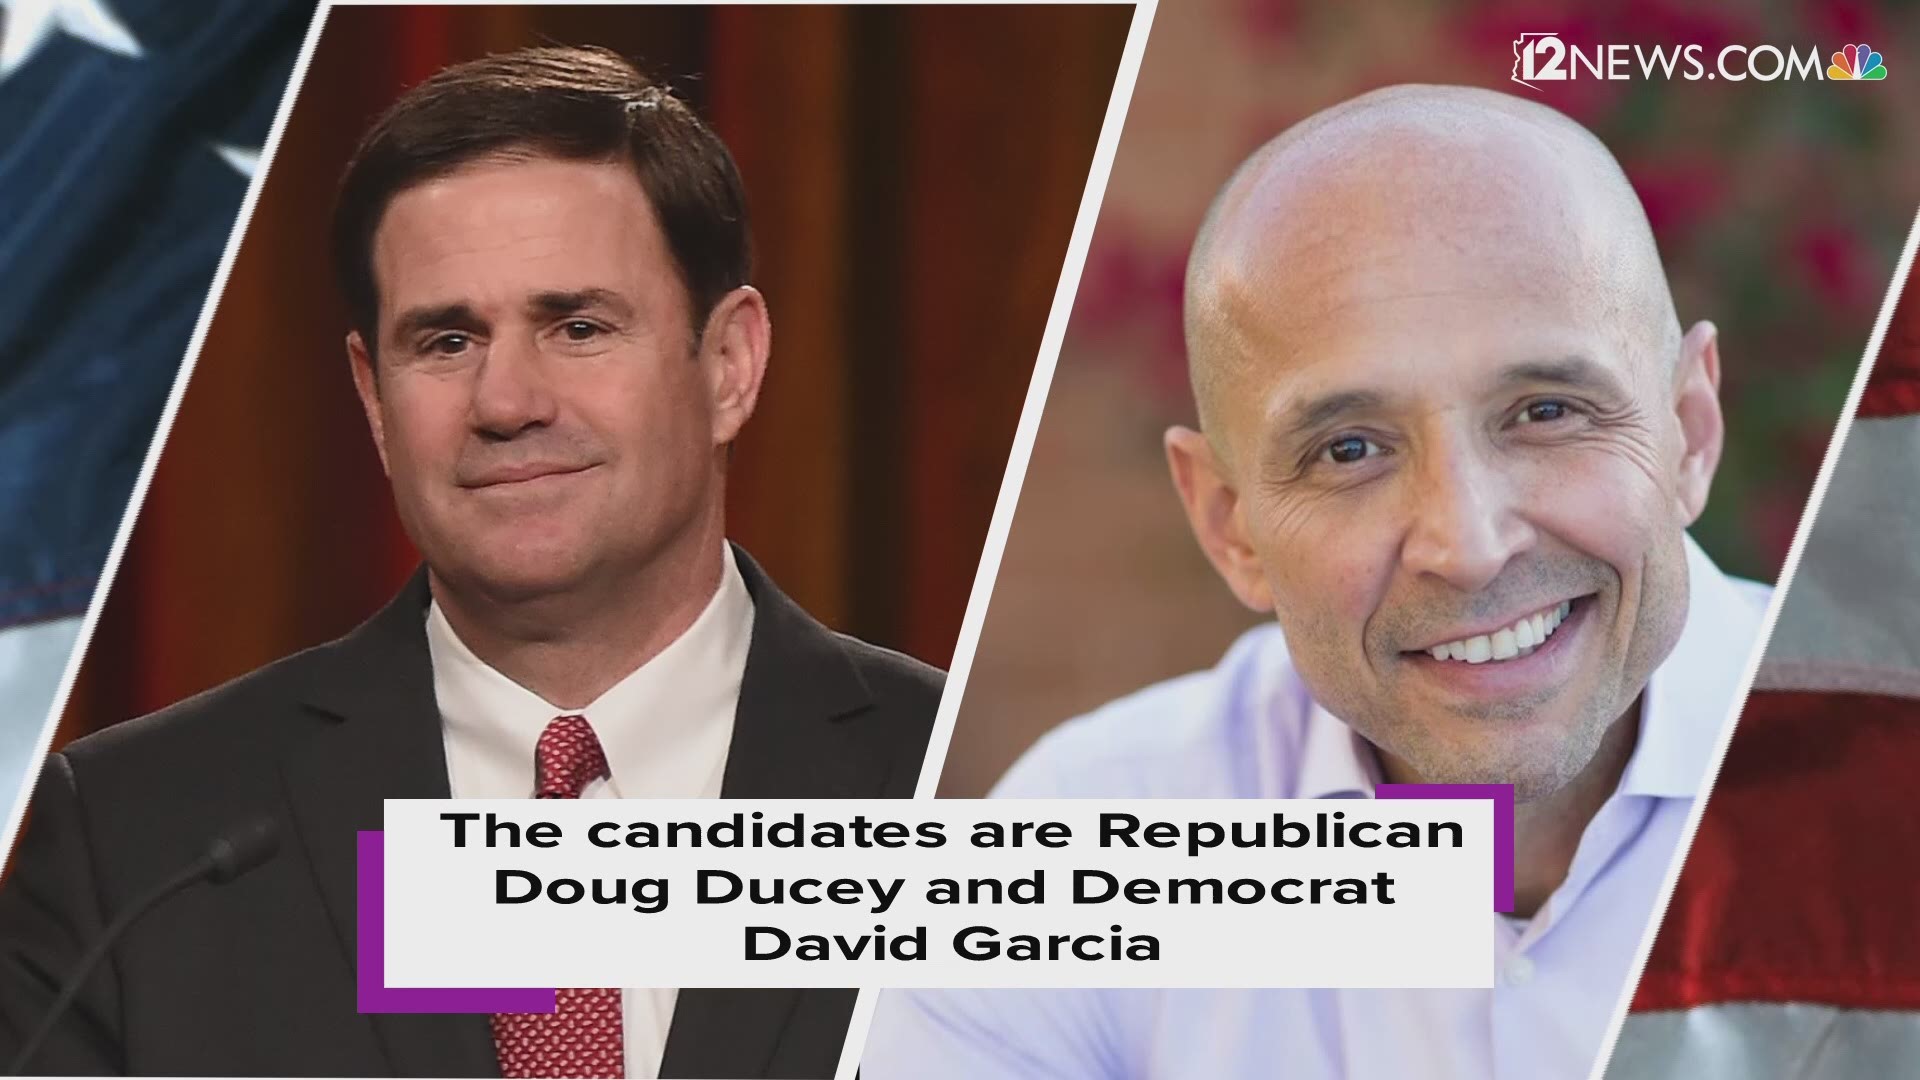 Republican Doug Ducey is running to keep his seat as governor against the Democrat challenger, David Garcia. We breakdown each candidate and their stance on key political issues.